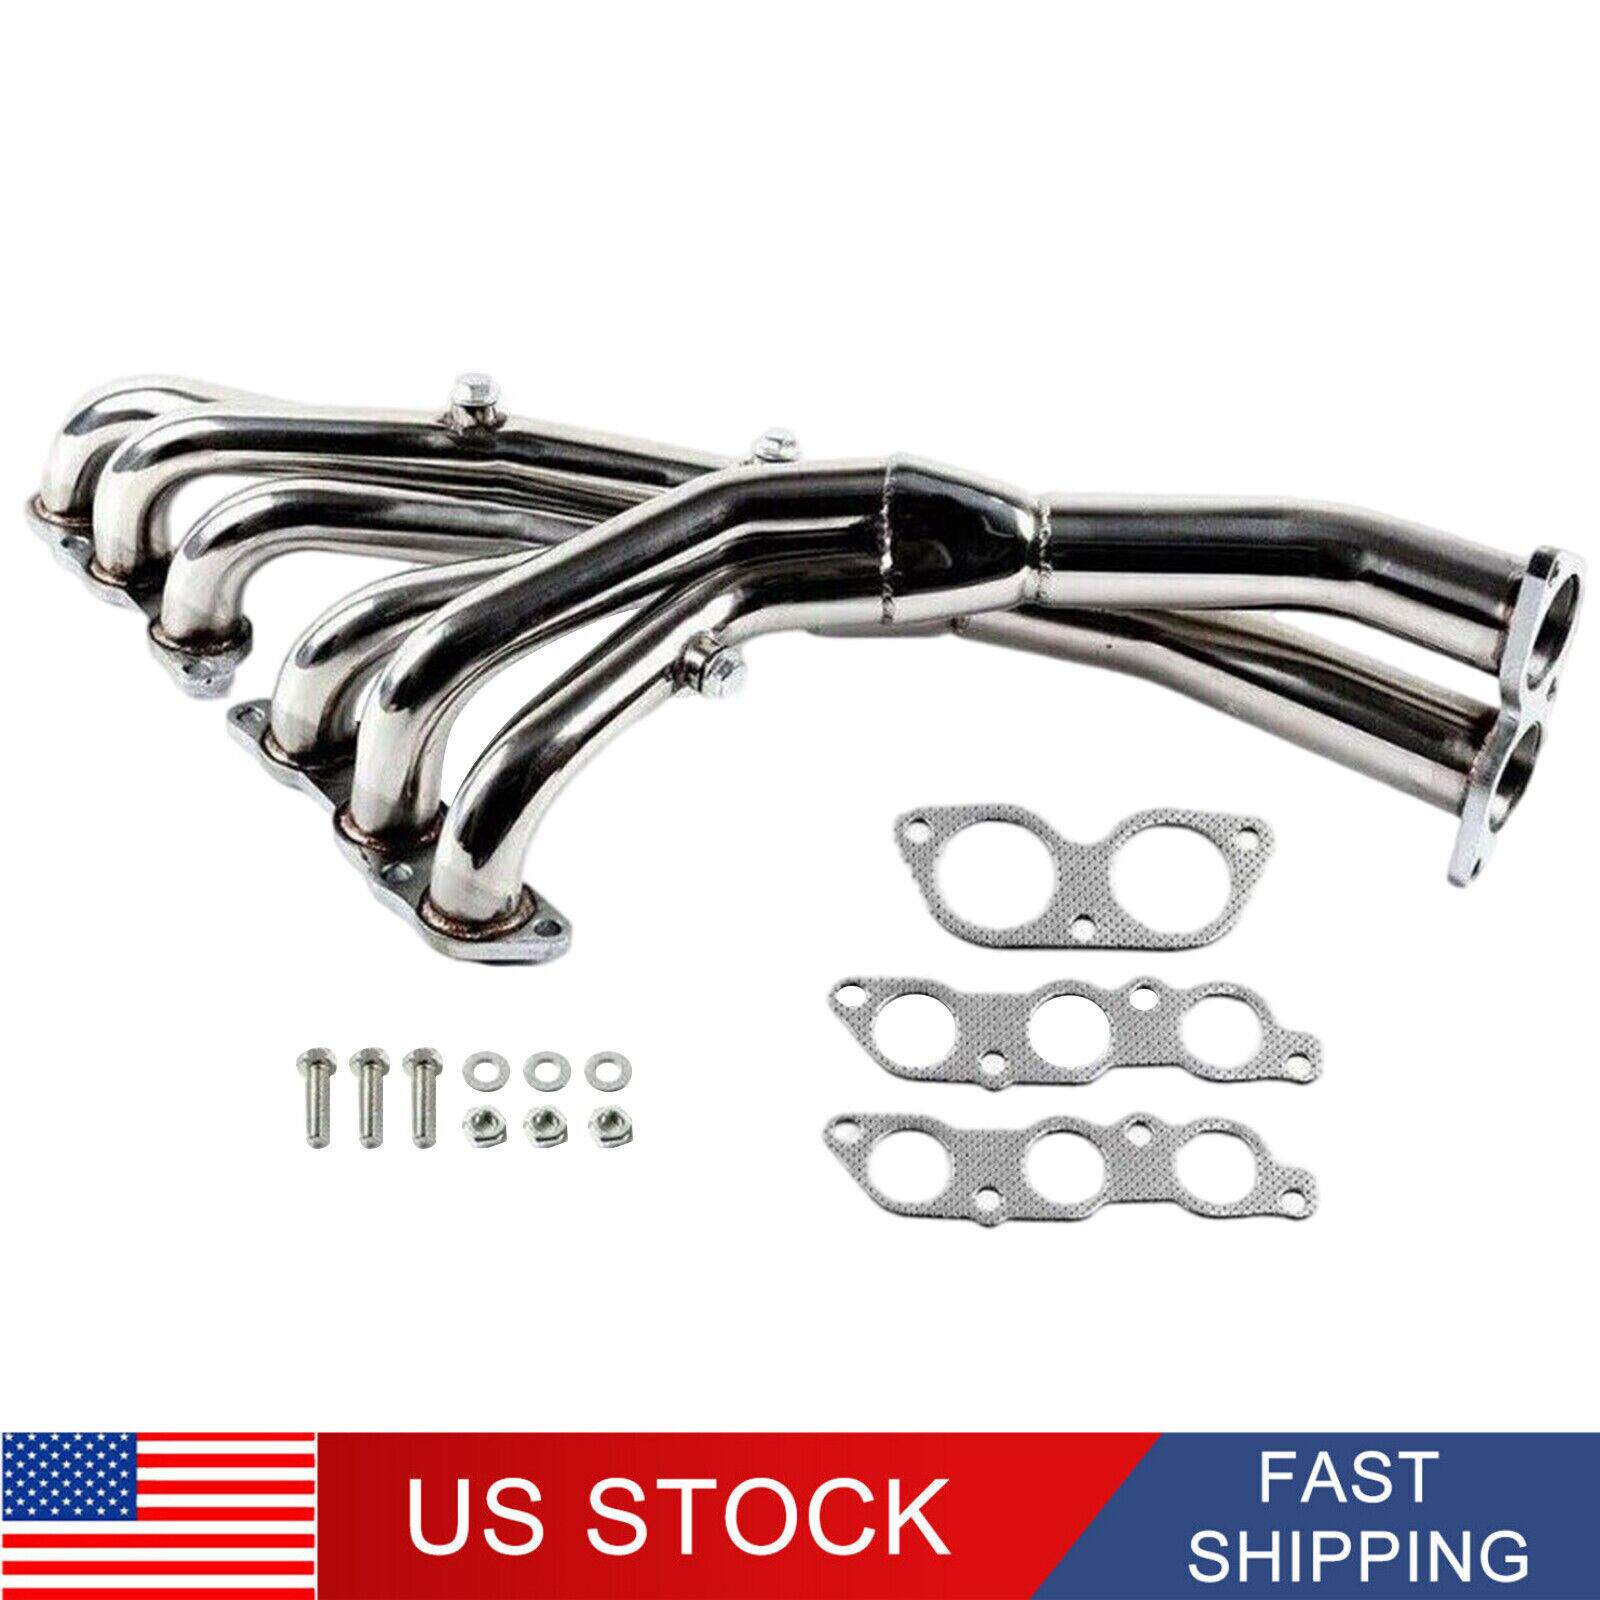 Stainless Steel Manifold Headers for Lexus IS300 01-05 3.0L 2JX-GE